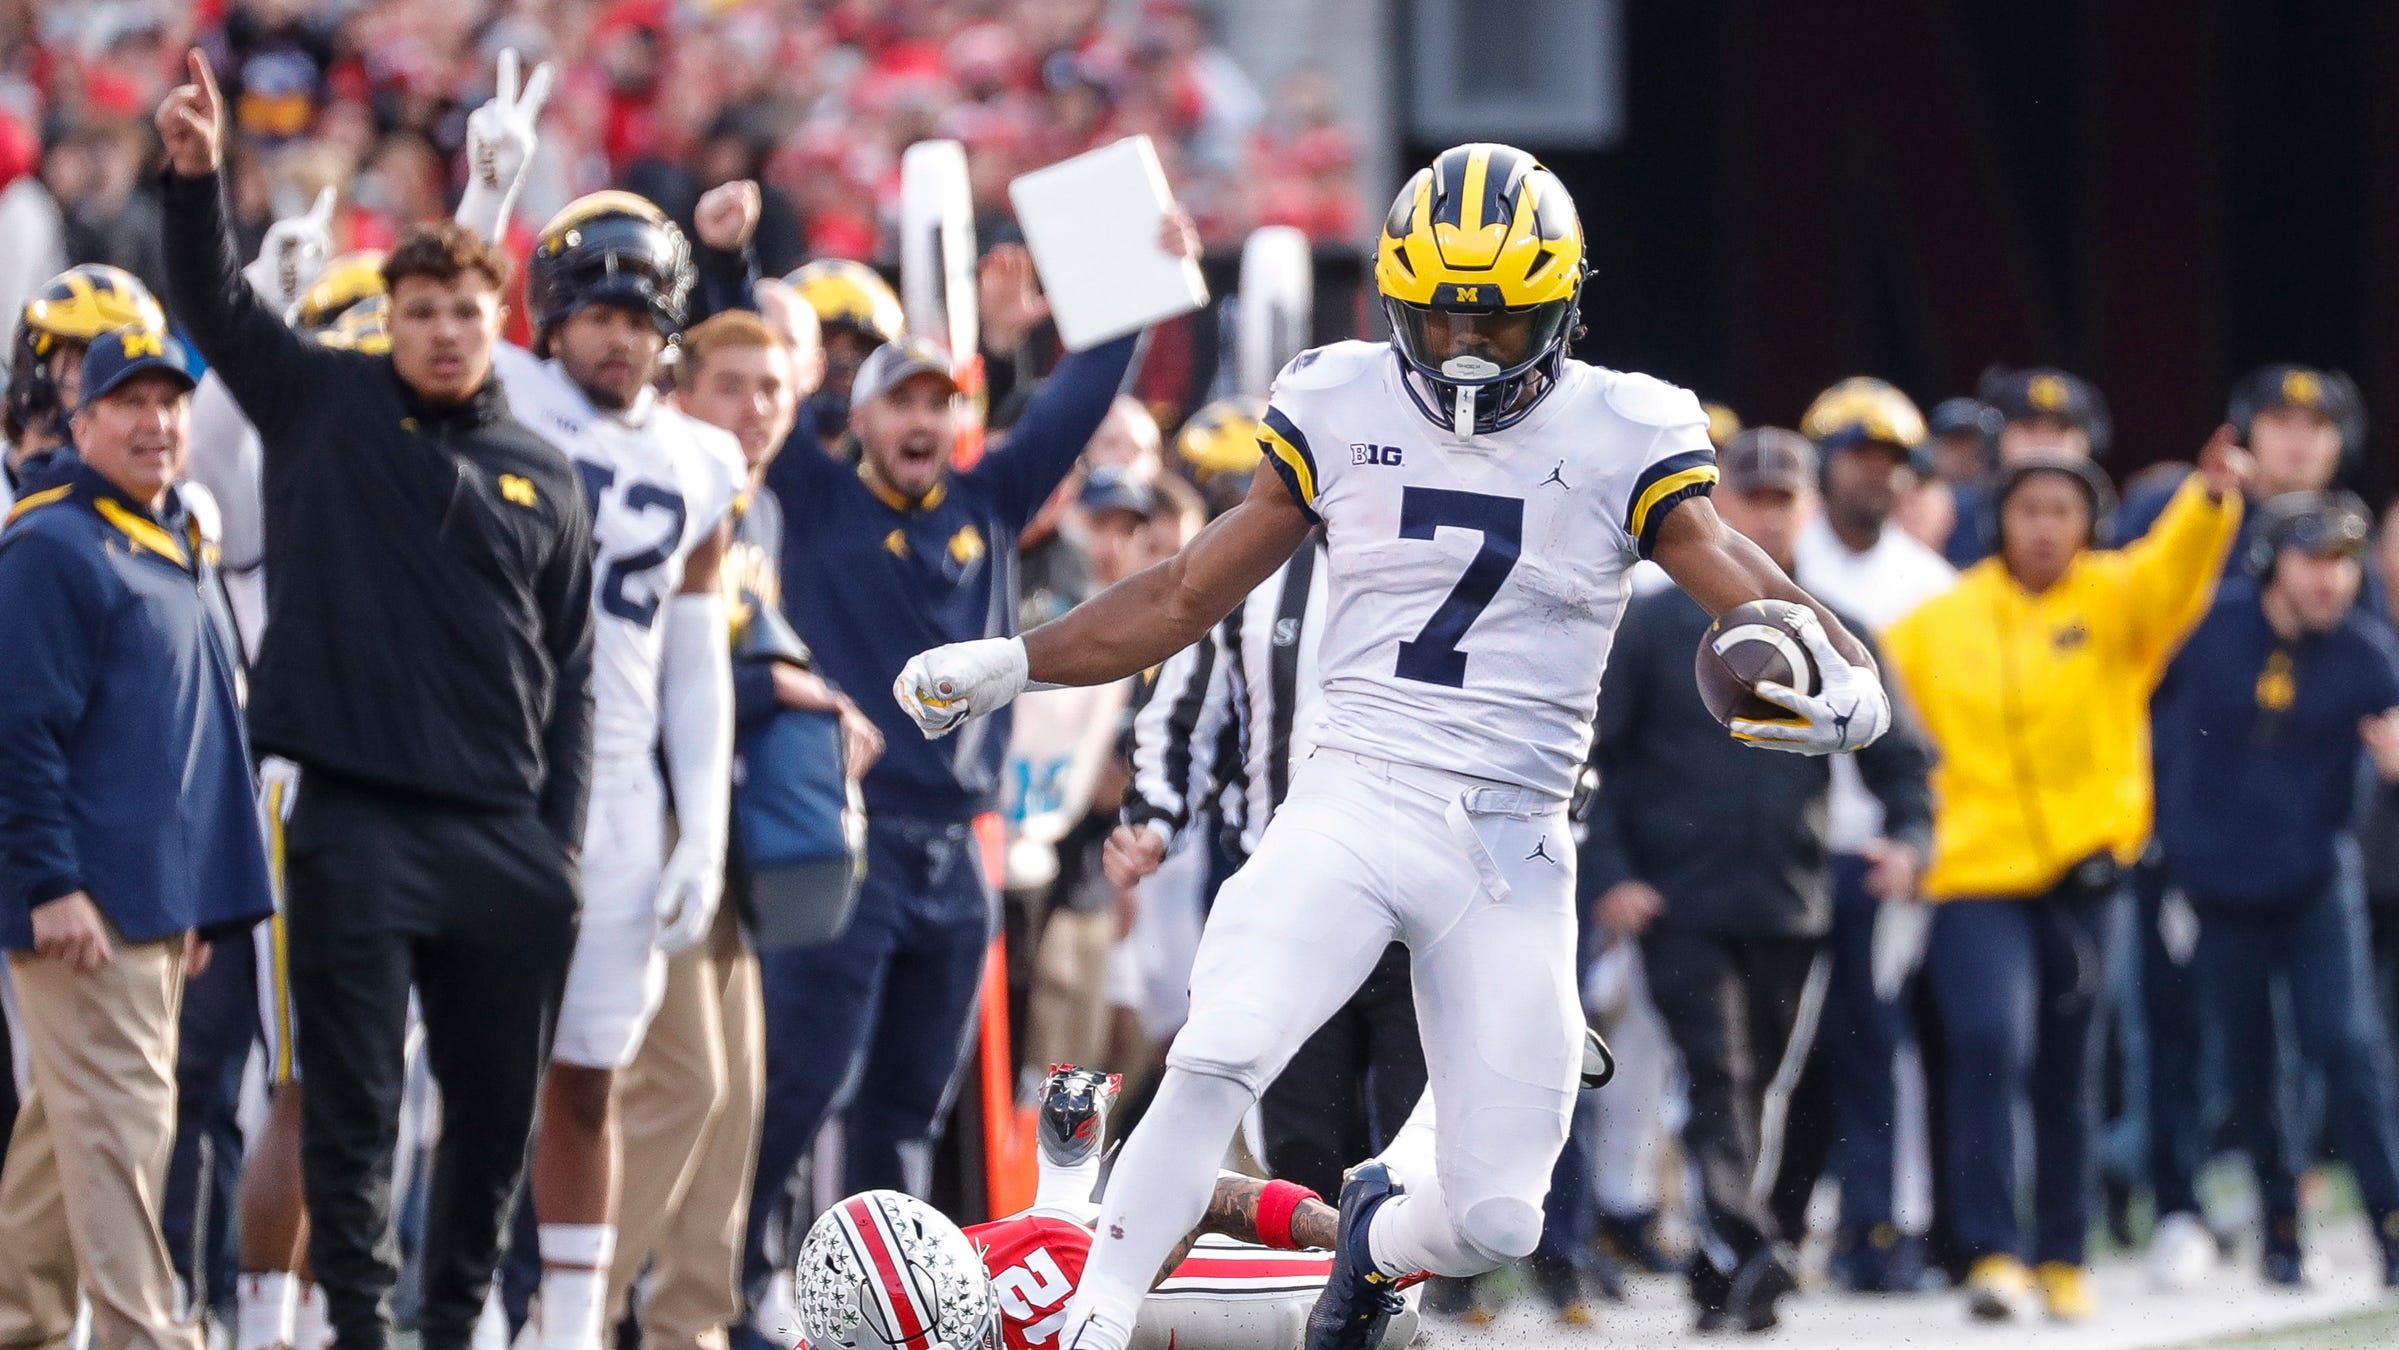 Michigan vs. Ohio State: The highest rated game in a long time